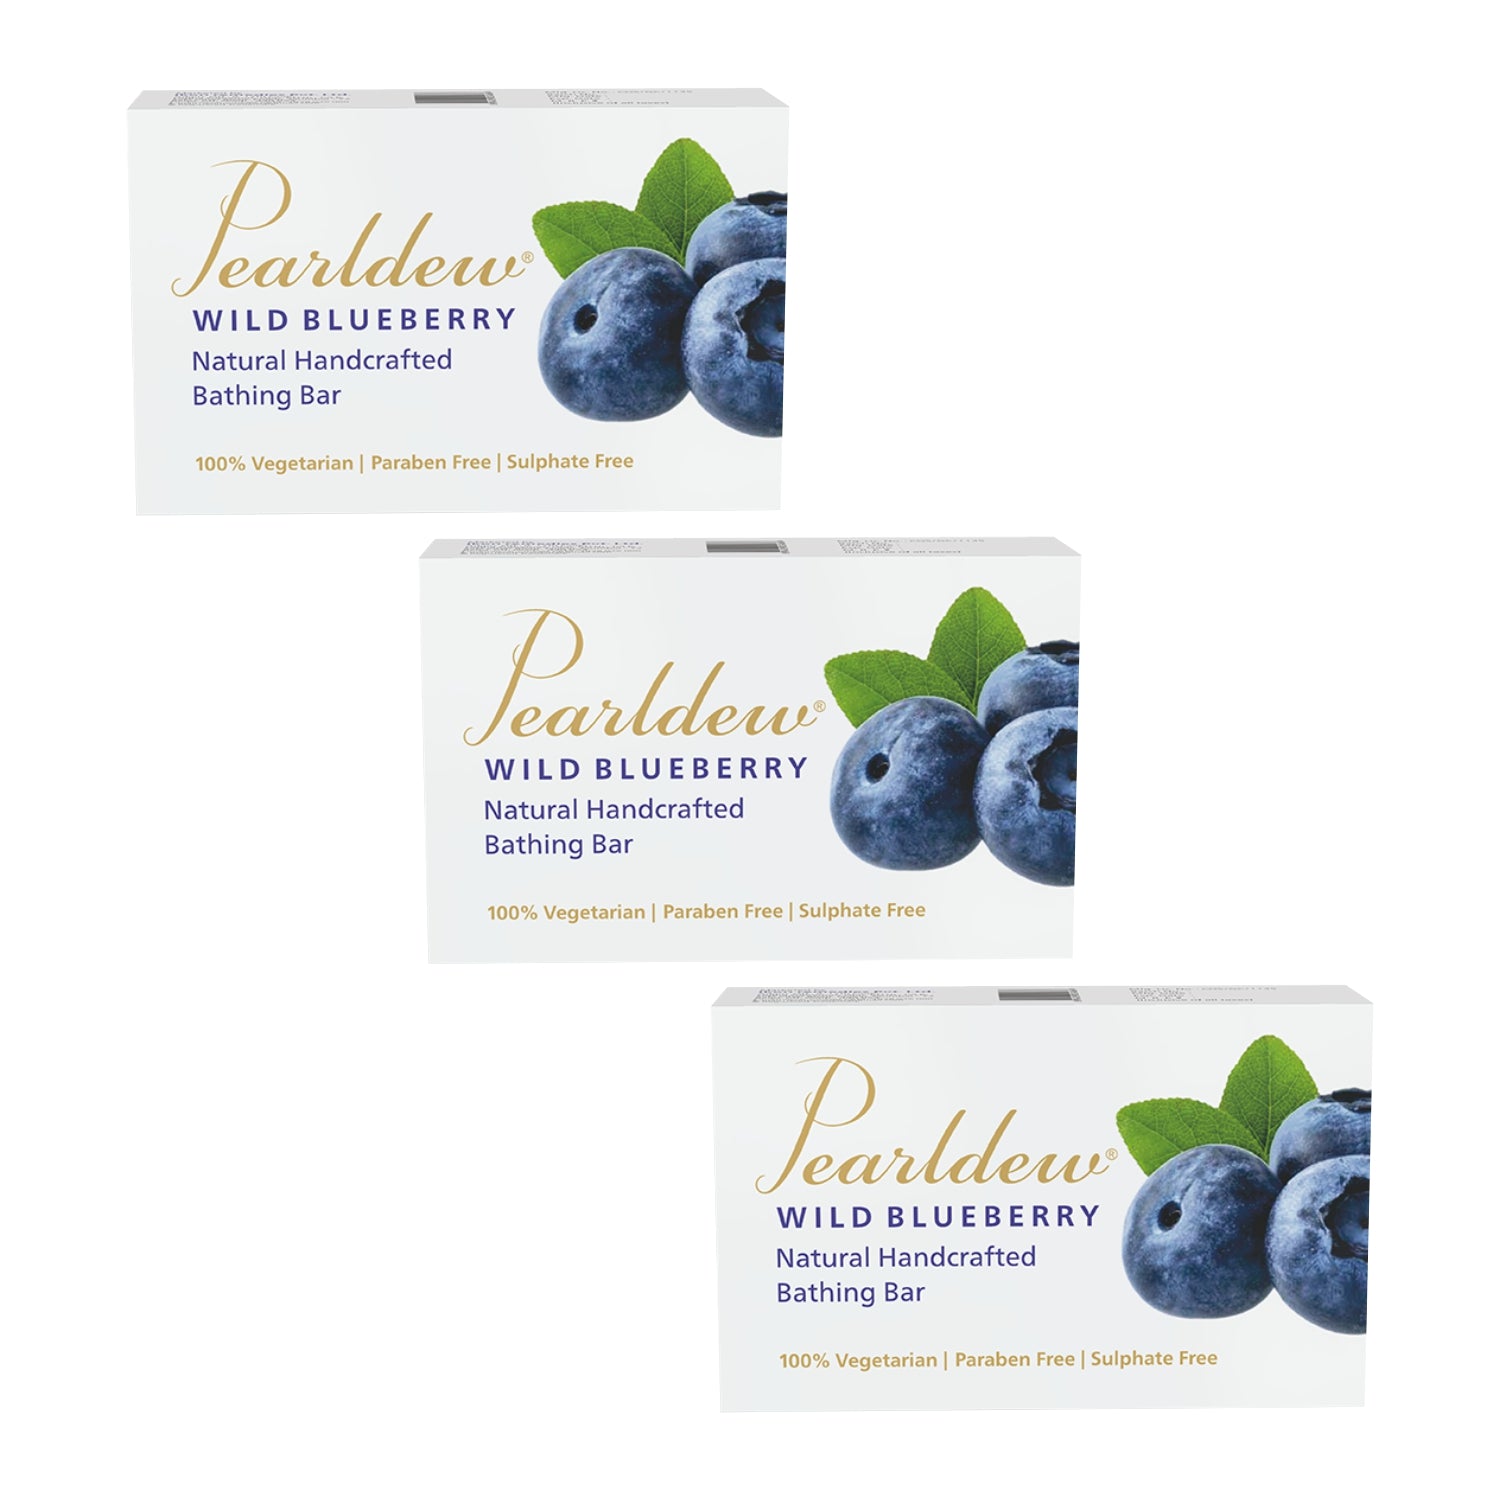 Pearldew Wild Blueberry Natural Handcrafted Bathing Bar (75 gm)